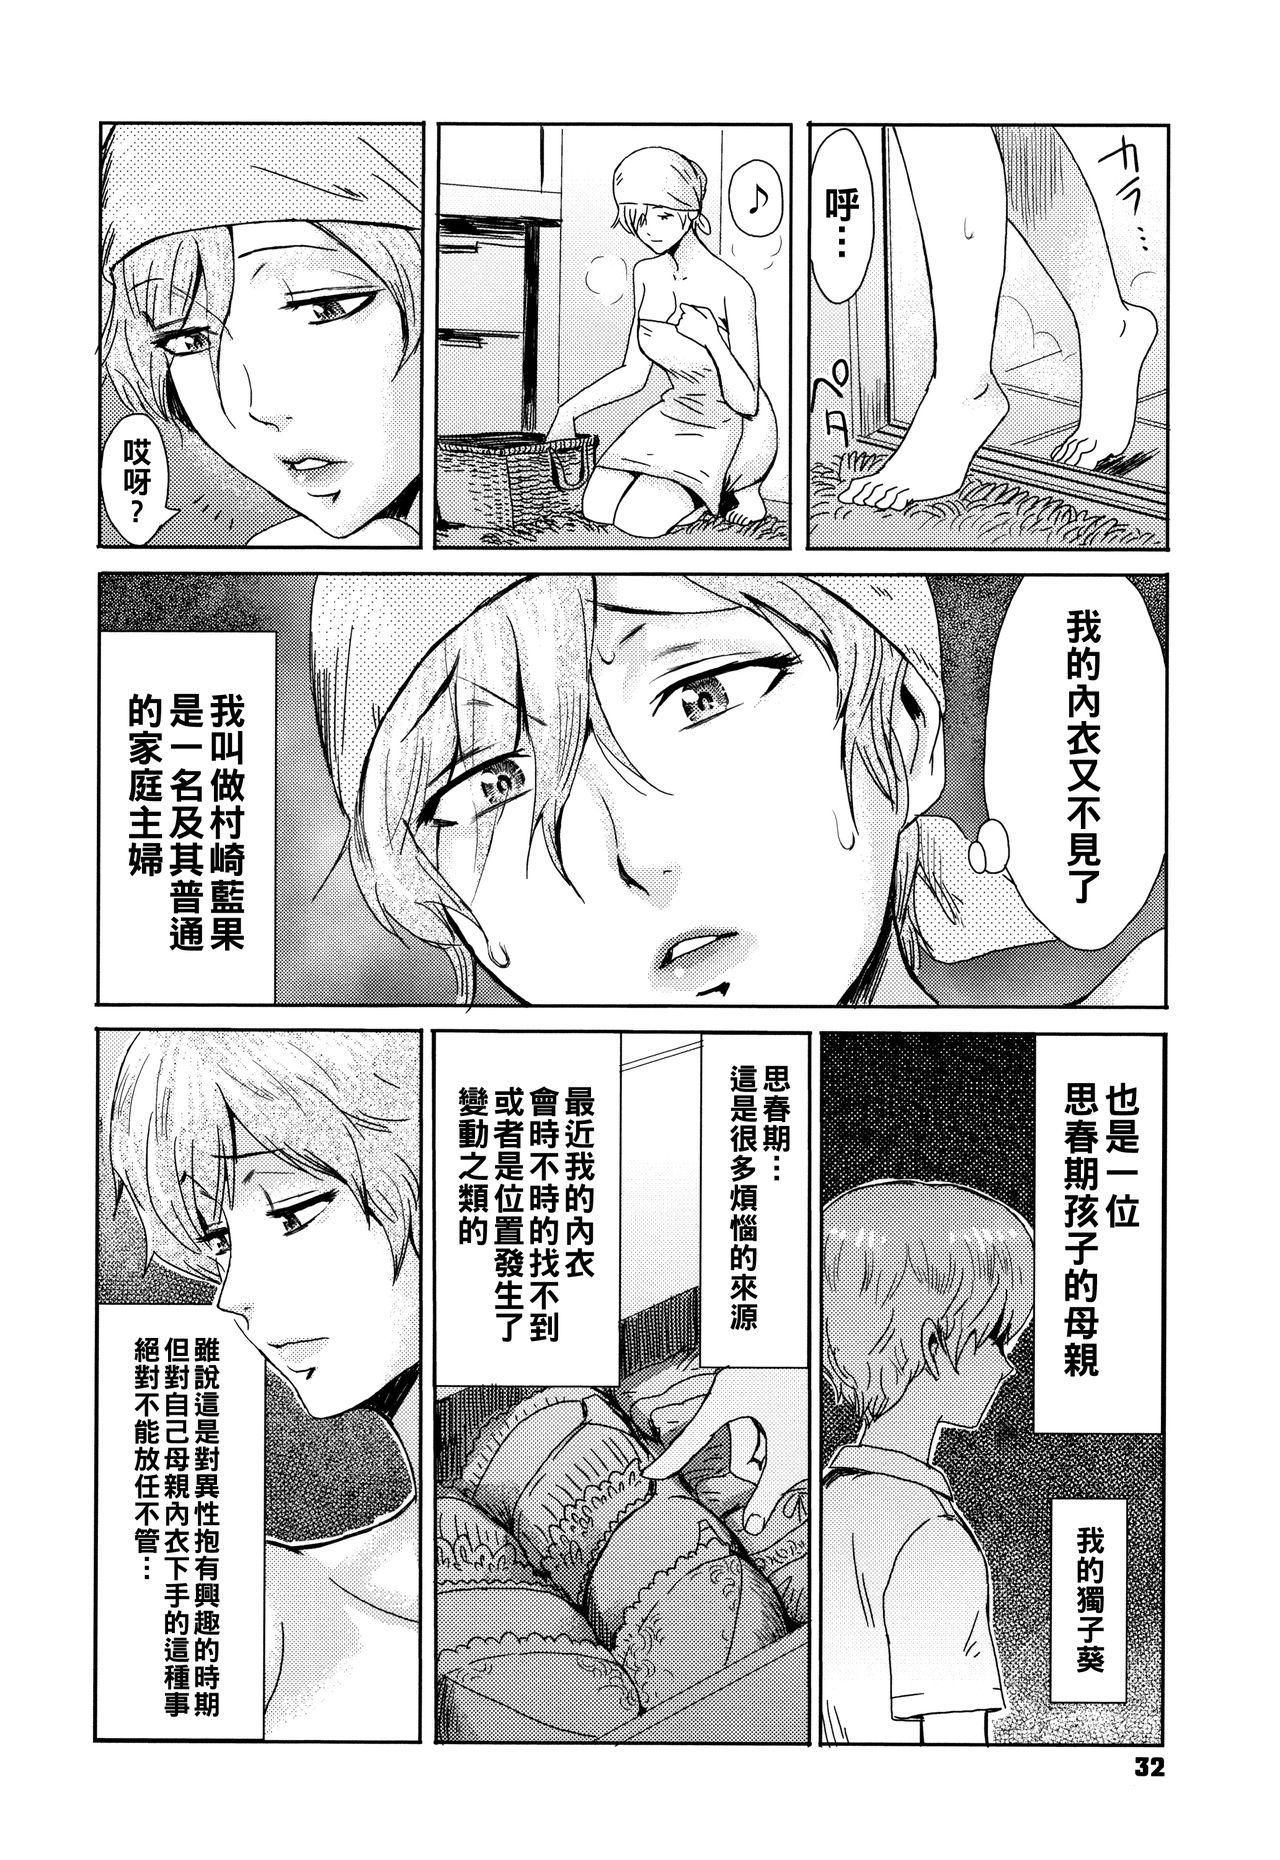 Argentino たべごろ 背徳の果実 1（Chinese） Massages - Page 2